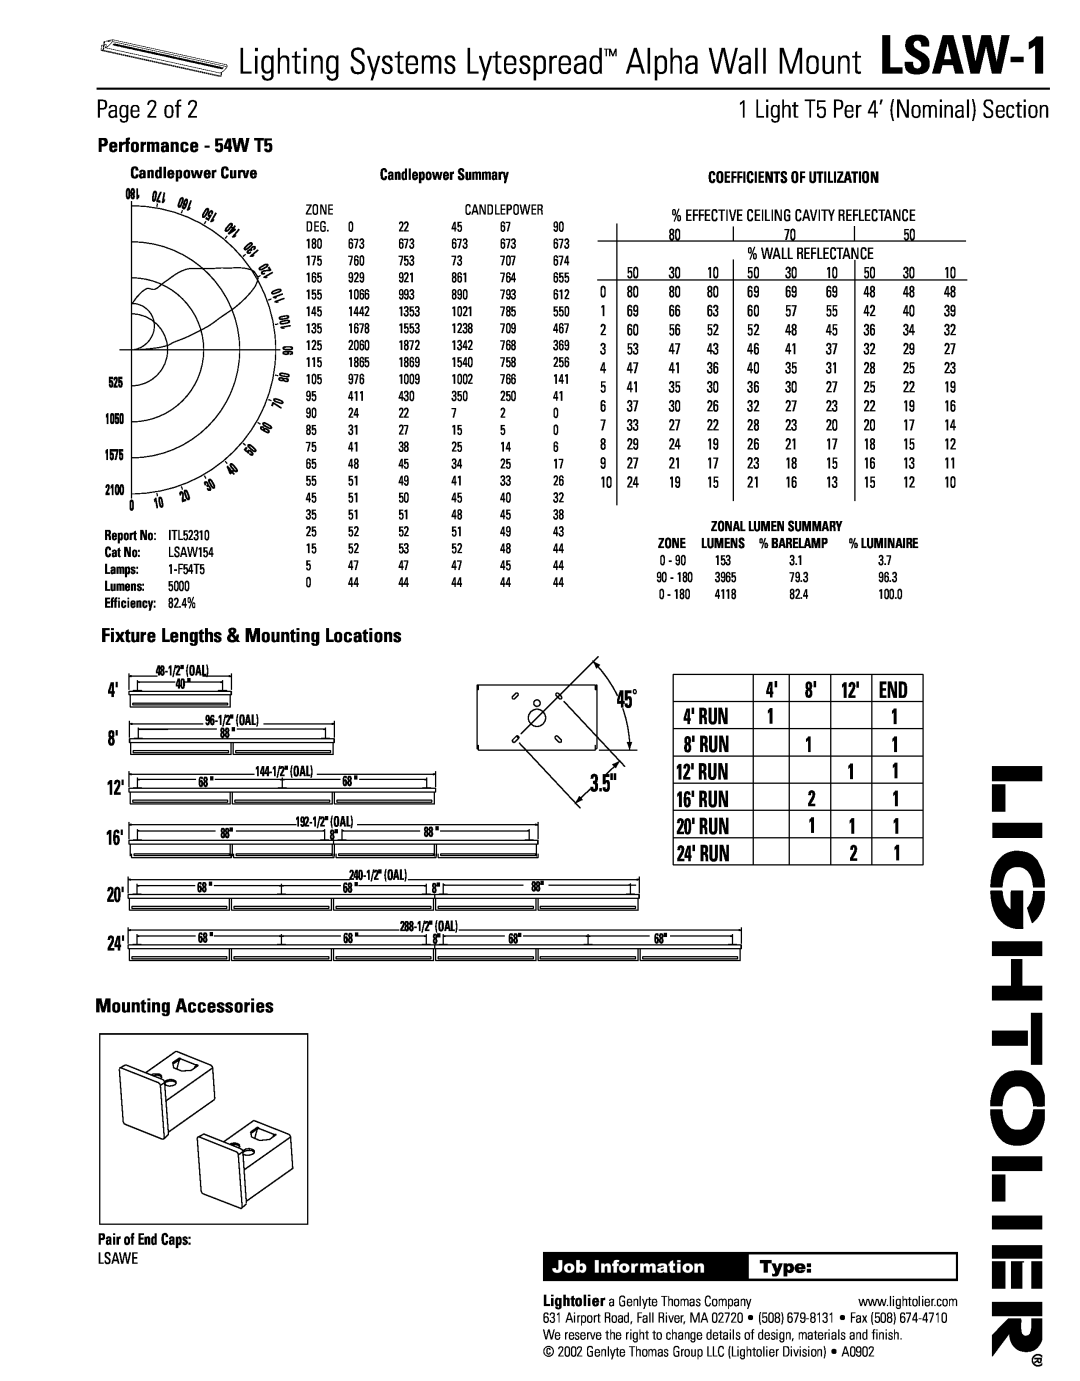 Lightolier LSAW-1 specifications Page 2 of 